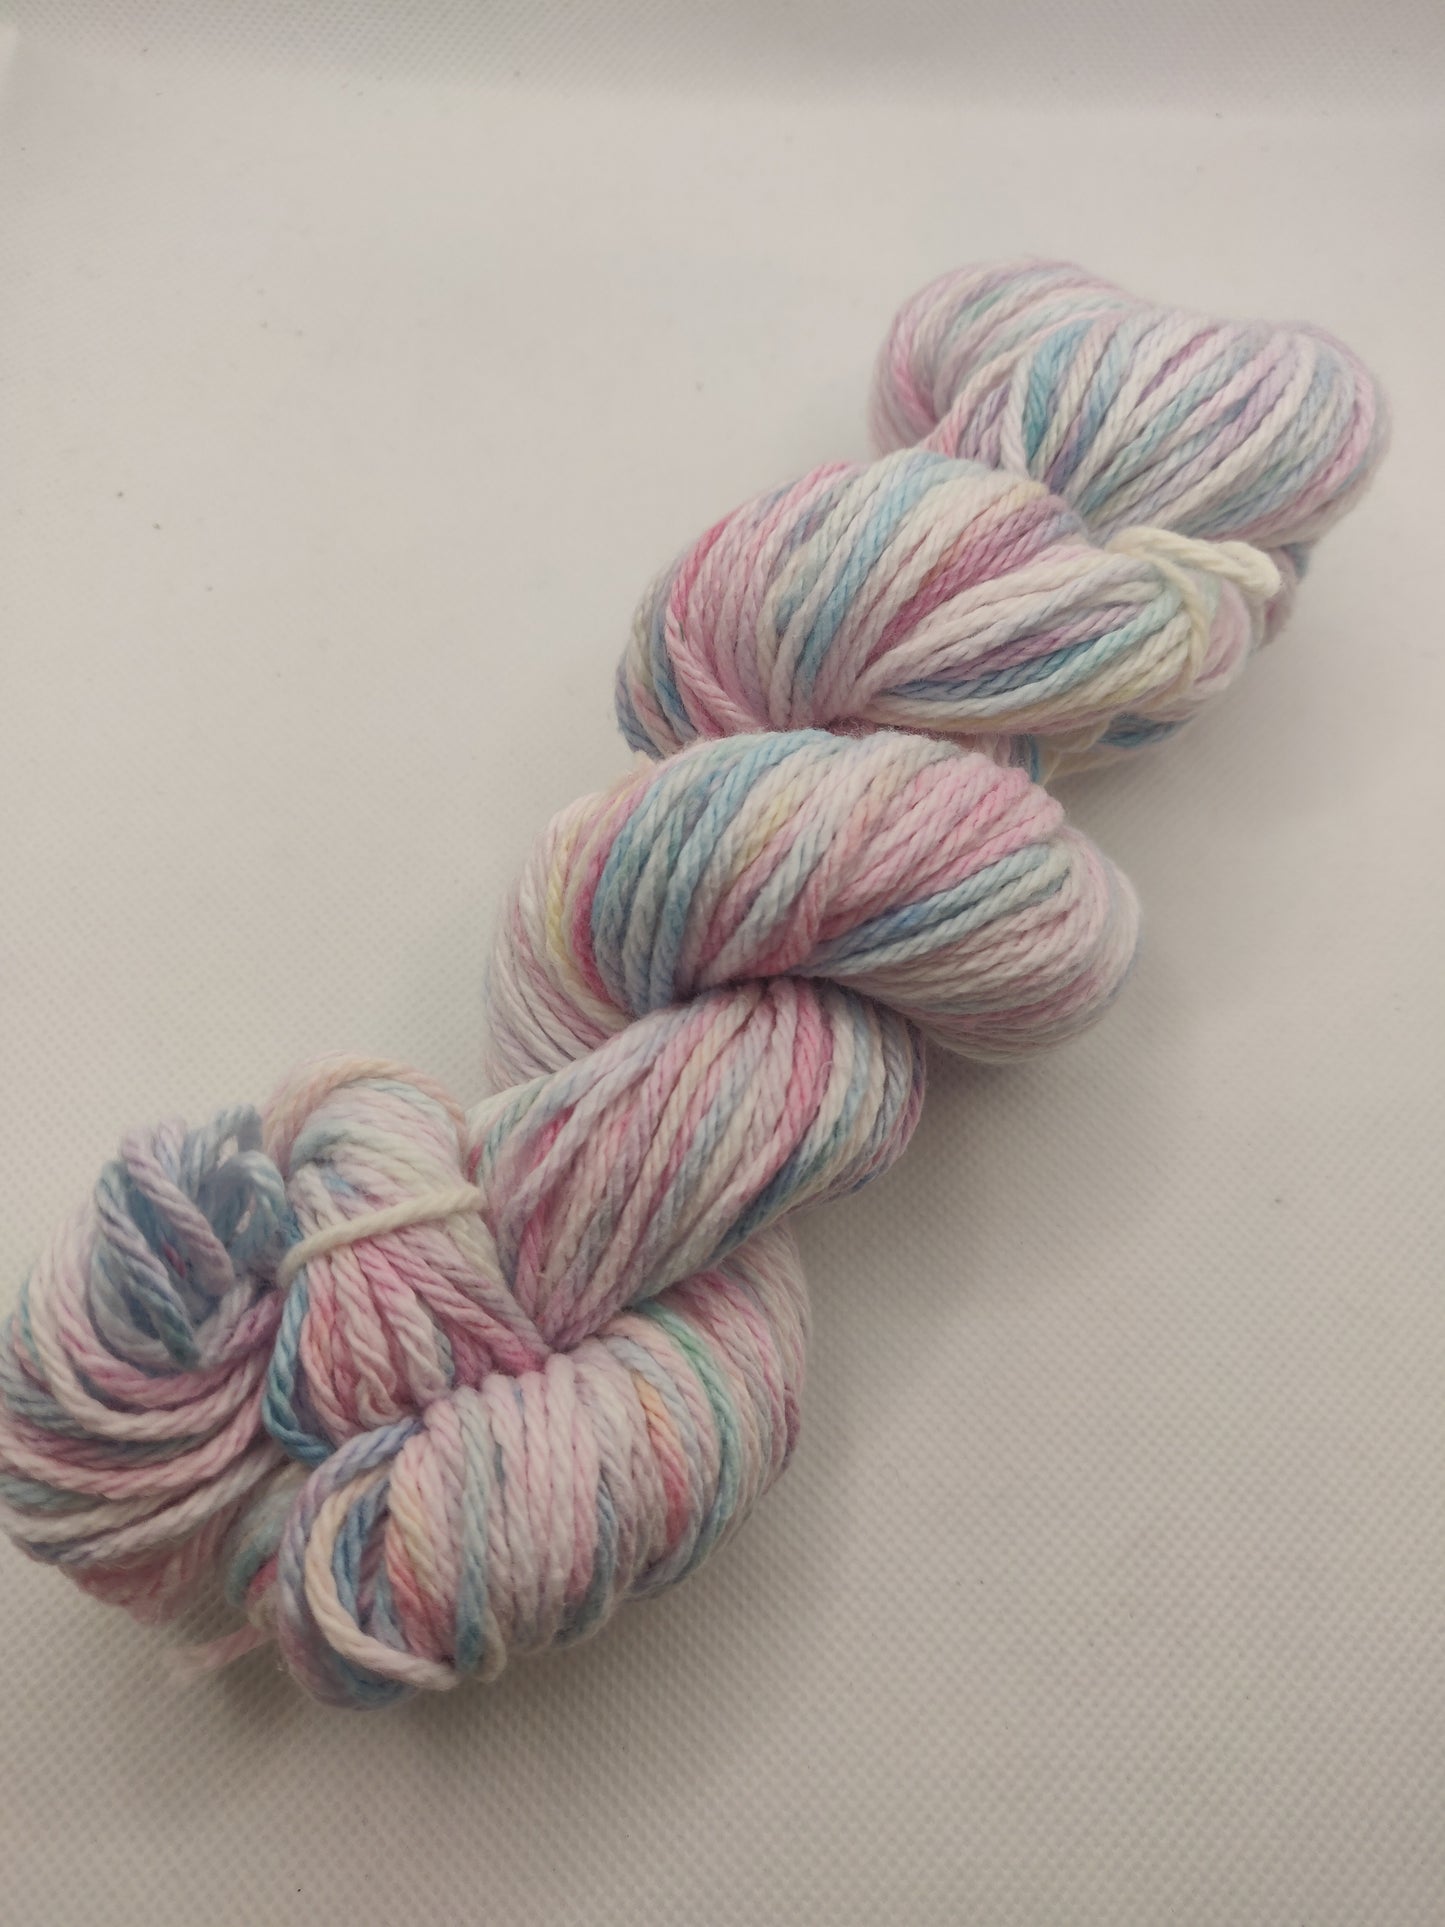 Cottton Candy - Hand Dyed Cotton Yarn